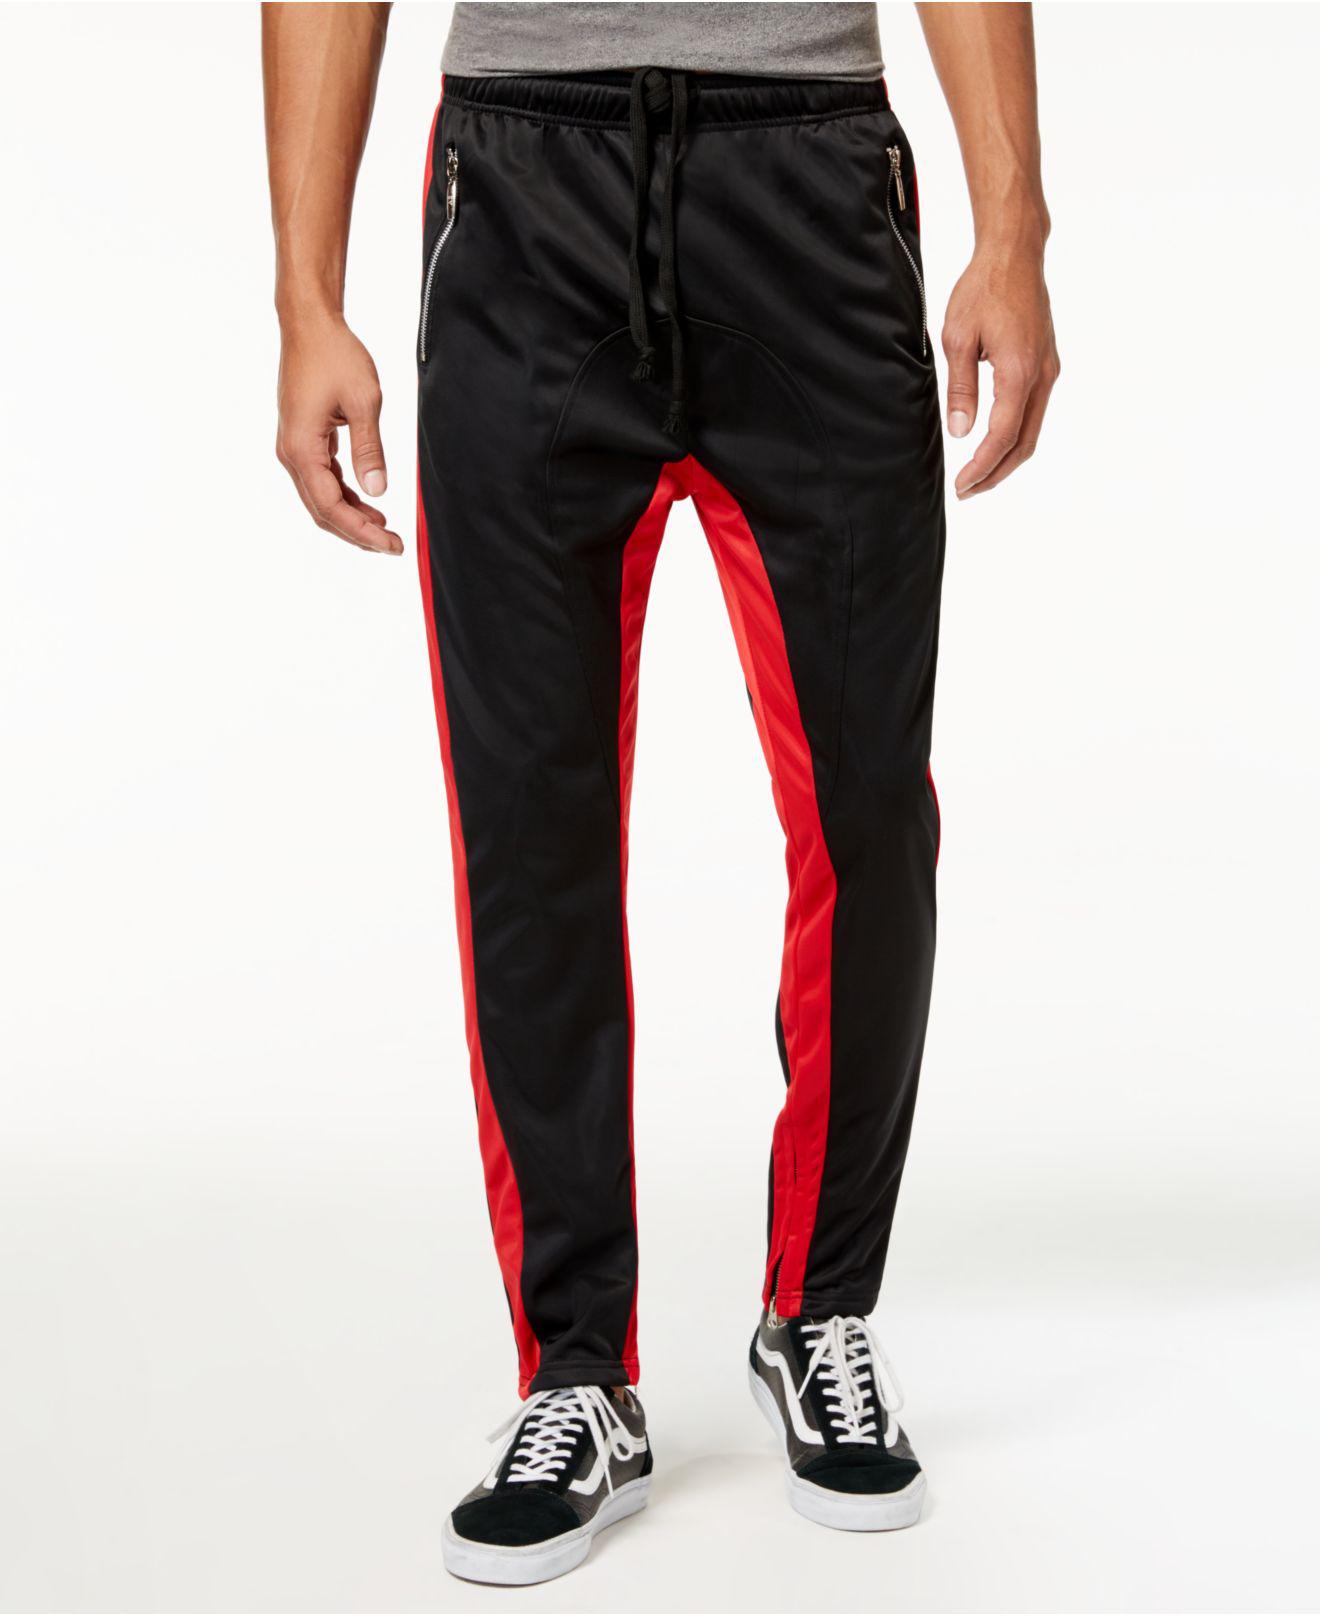 American Stitch Men's Tricot Stripe Track Pants in Black/Red Stripe (Red) for Men - Lyst